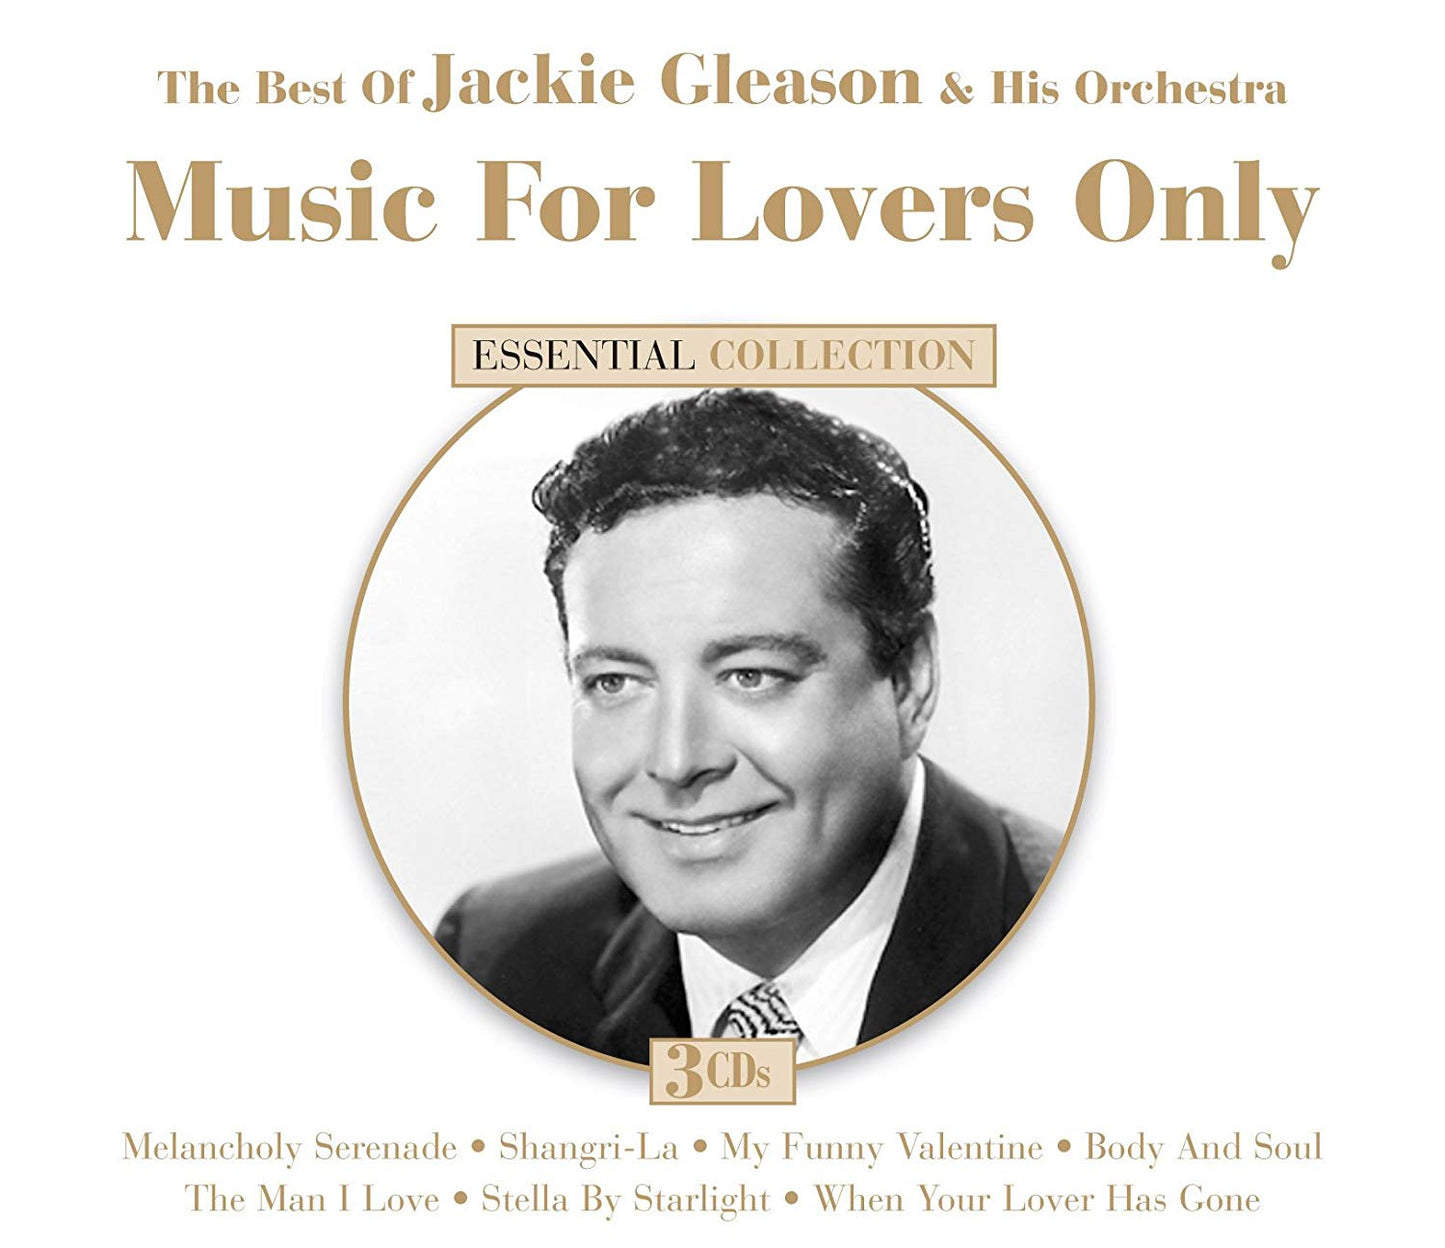 JACKIE GLEASON: Essential Collection (3 CDS)